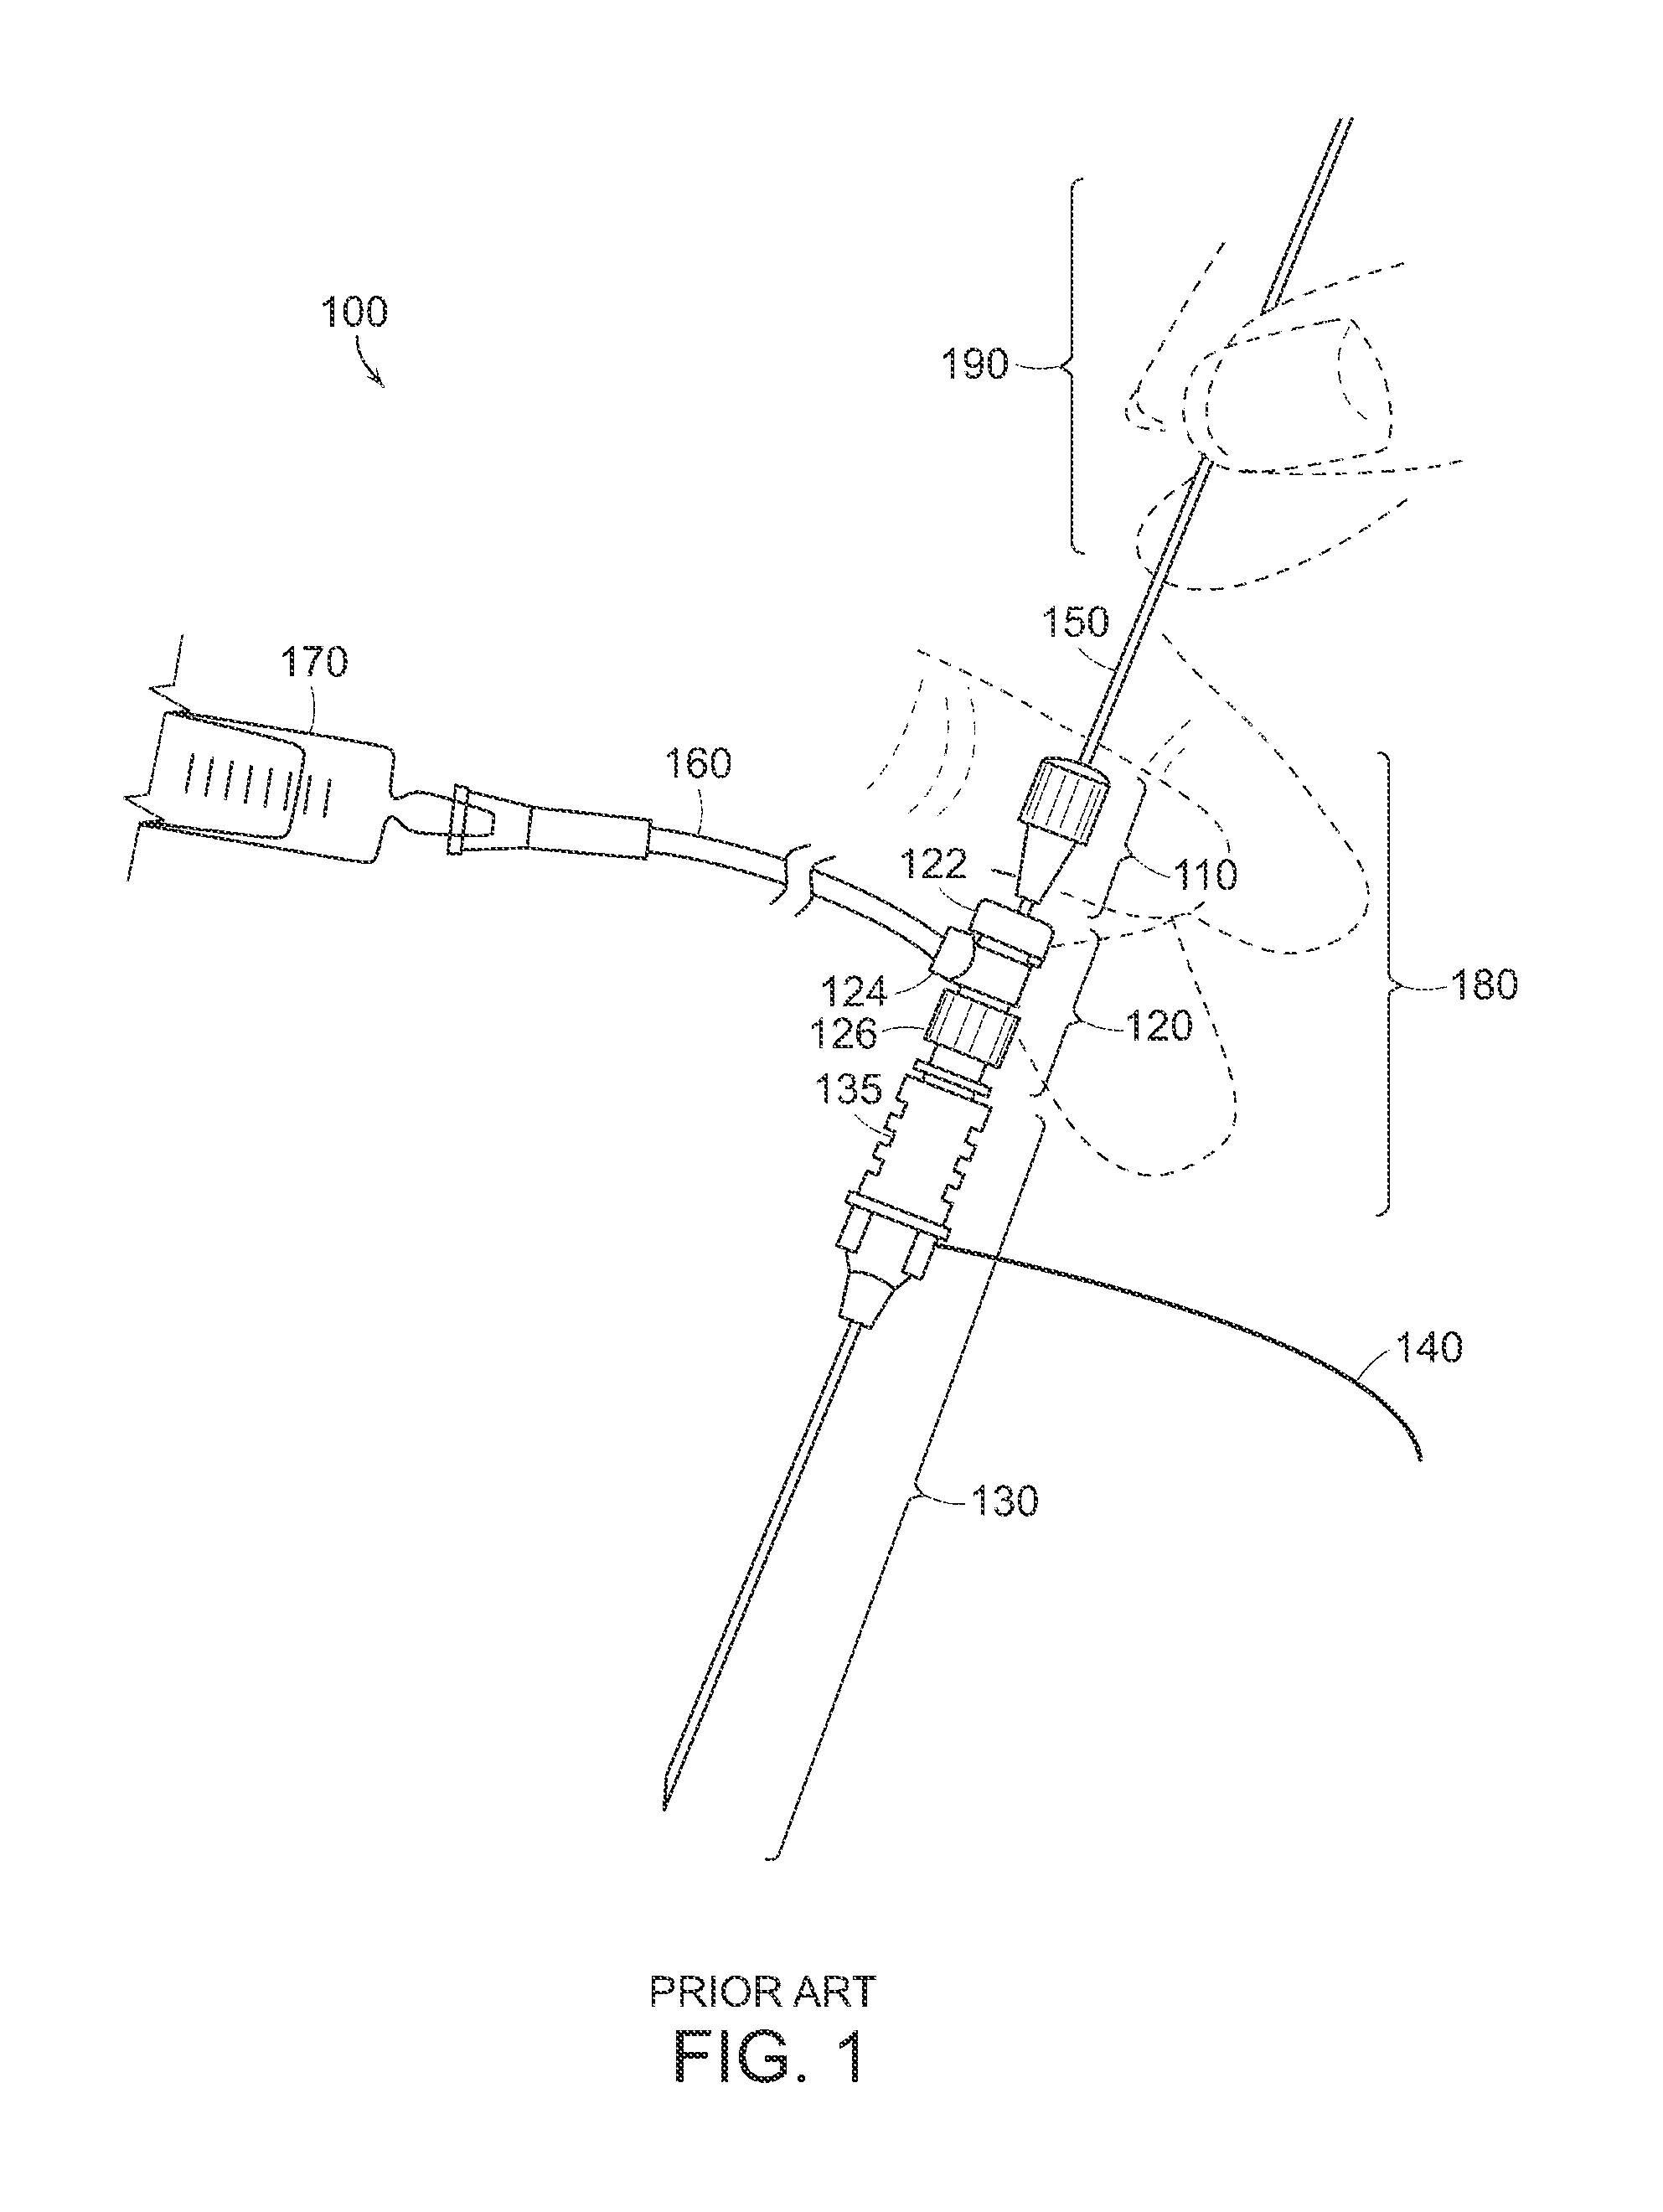 Catheter system and method for administering regional anesthesia to a patient